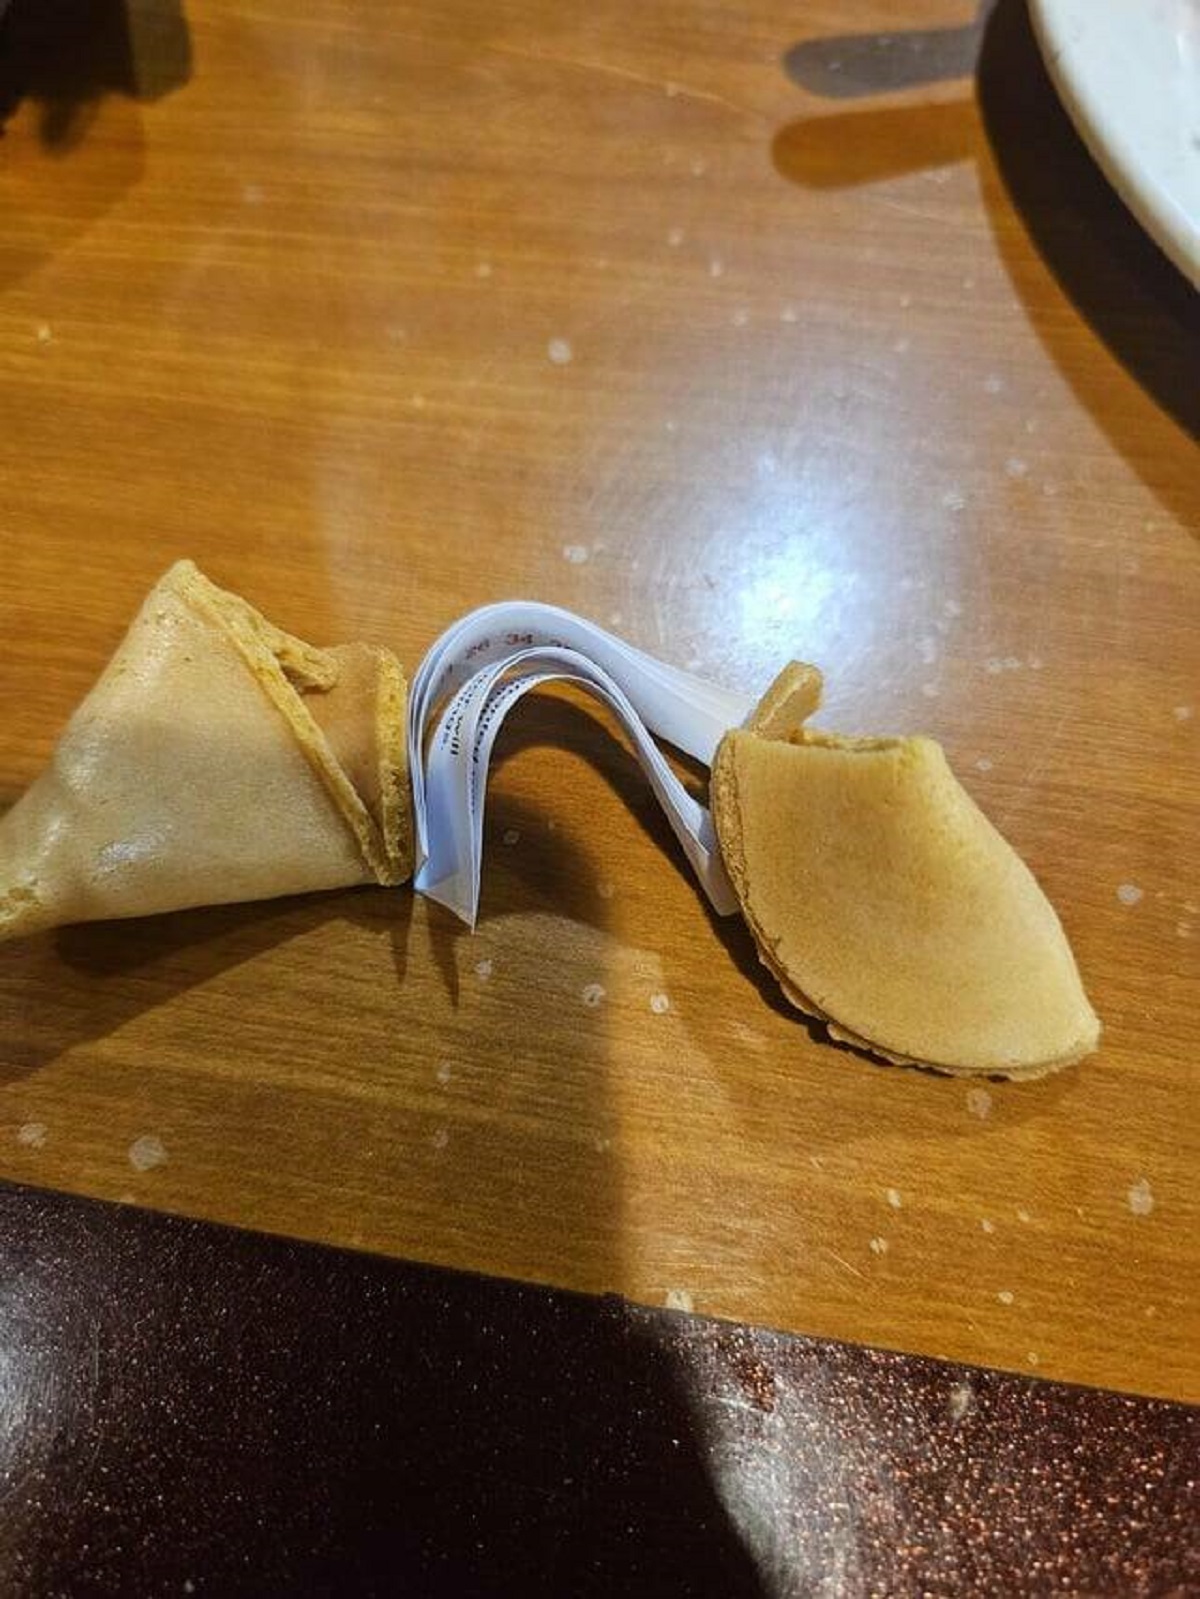 "I got 6 fortunes in a fortune cookie."